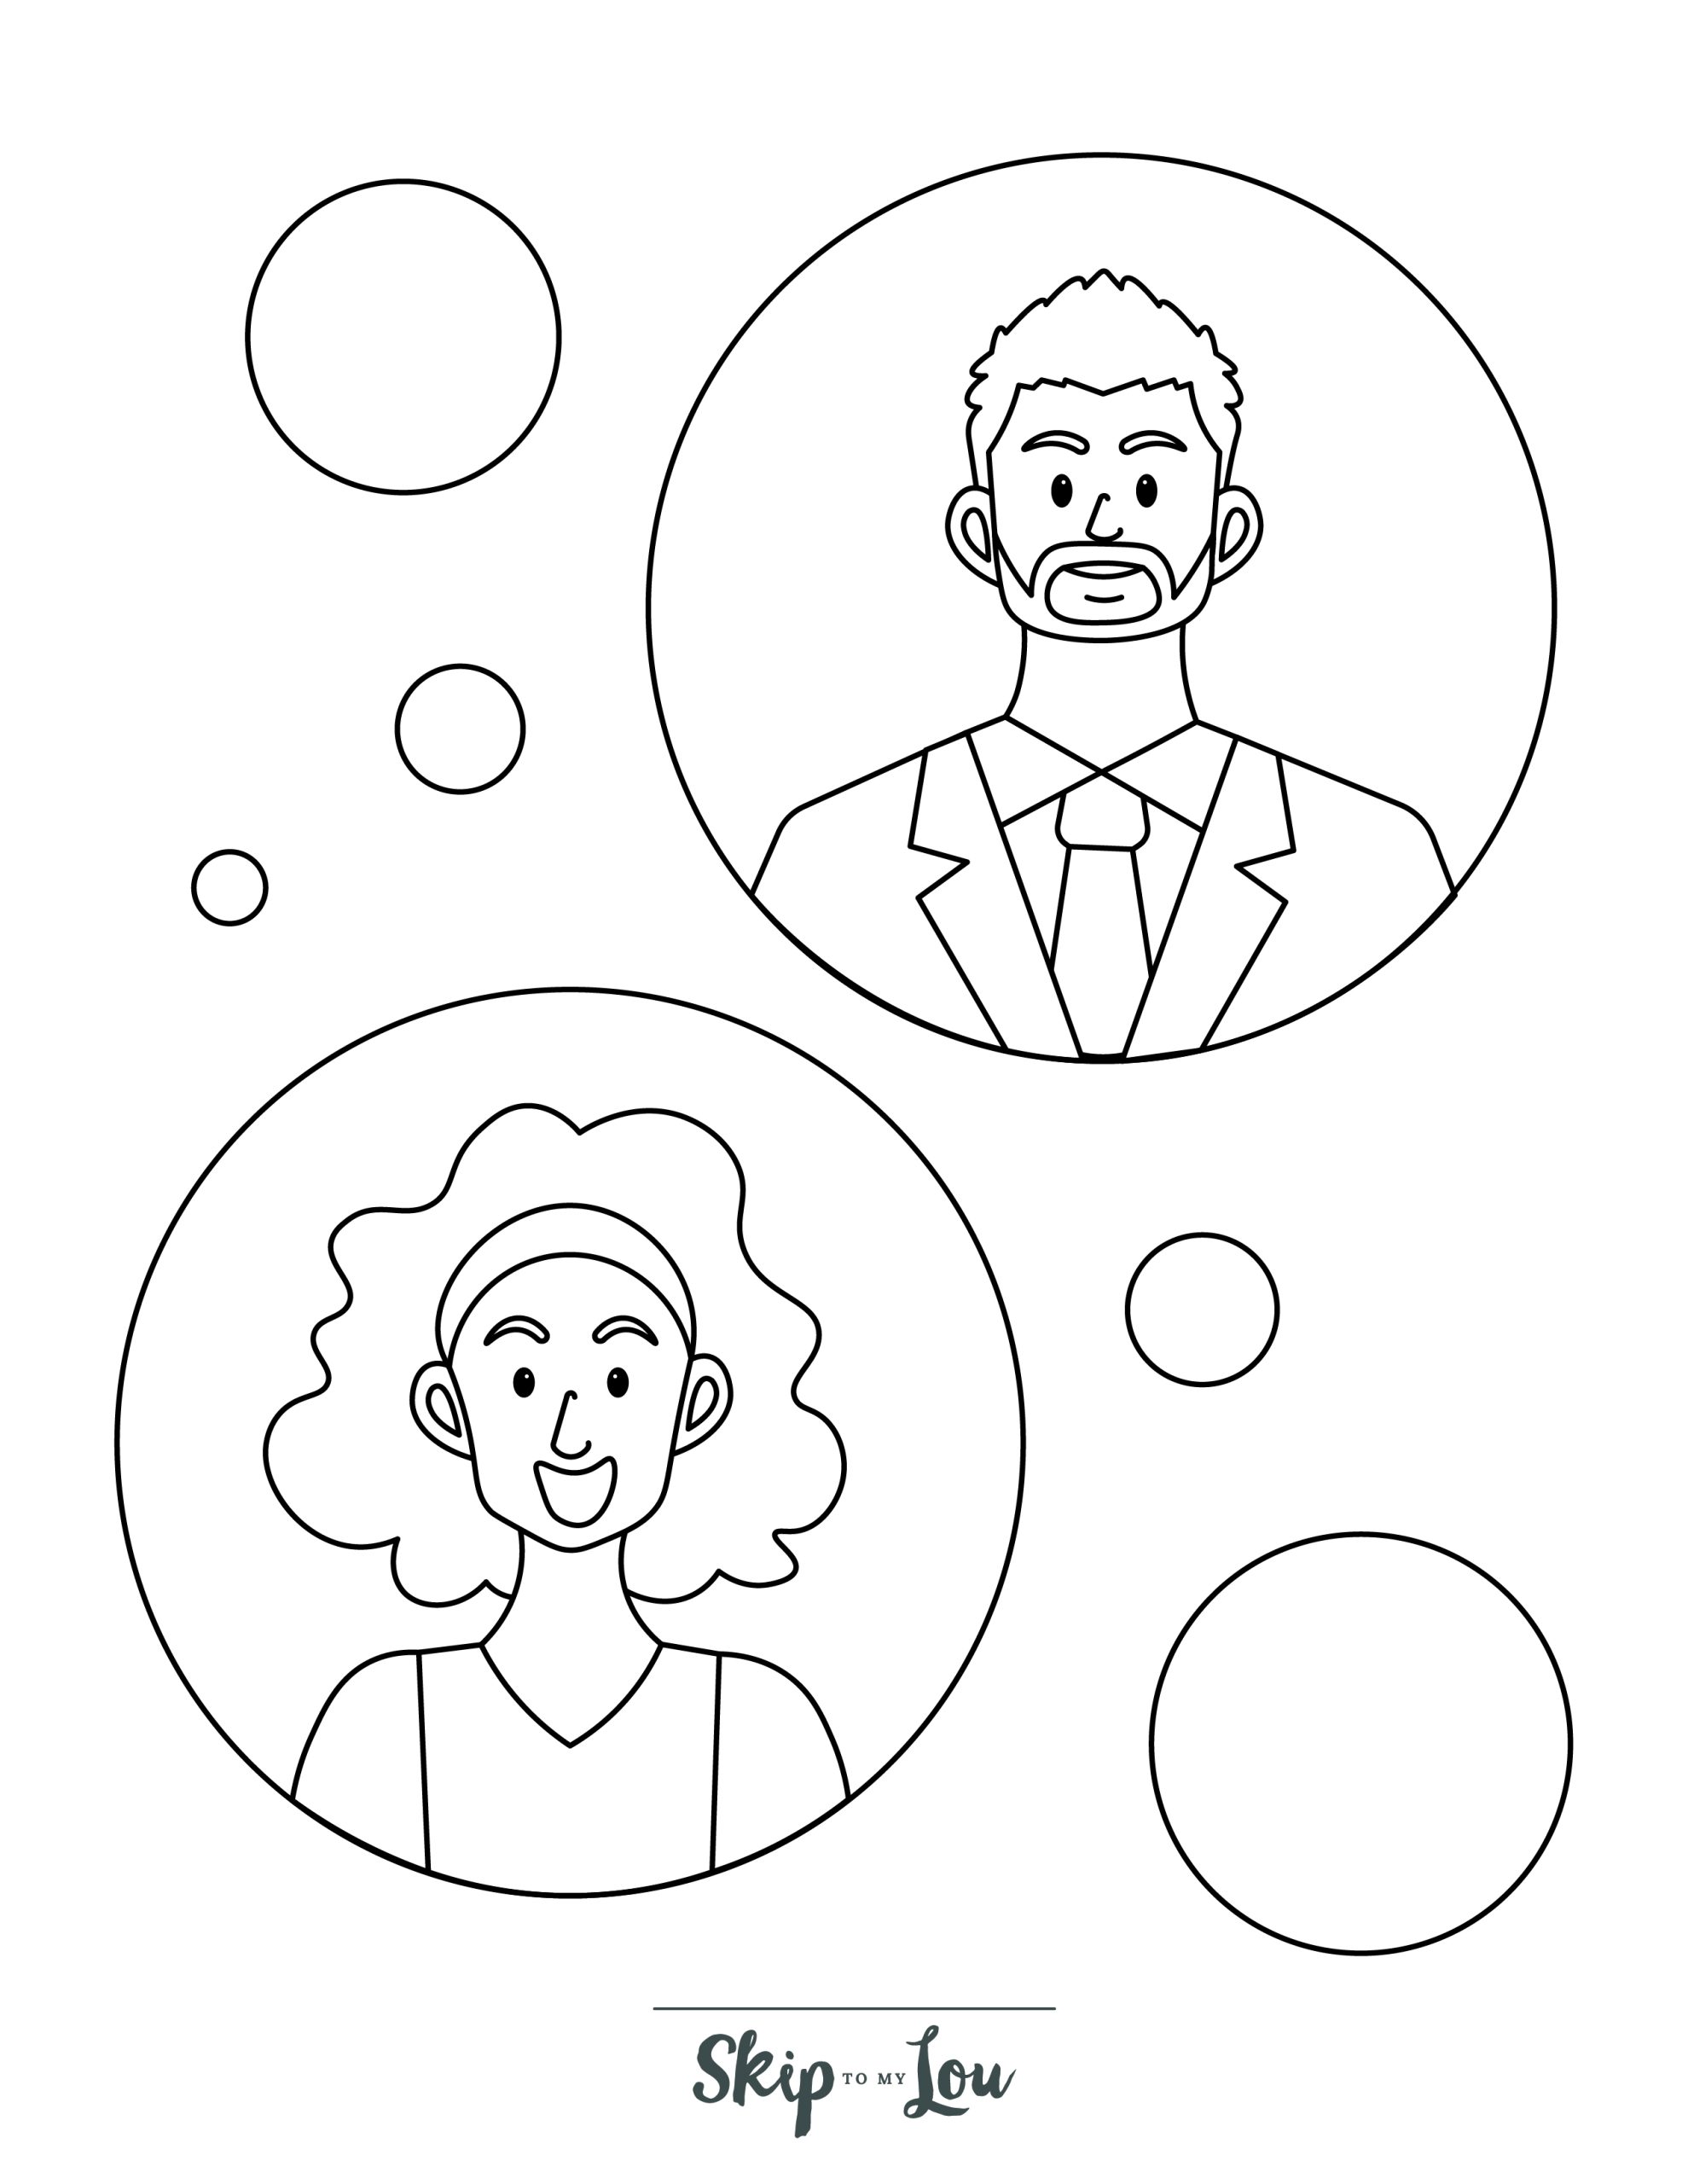 People Coloring Page 2 - Line drawing of husband and wife in bubbles